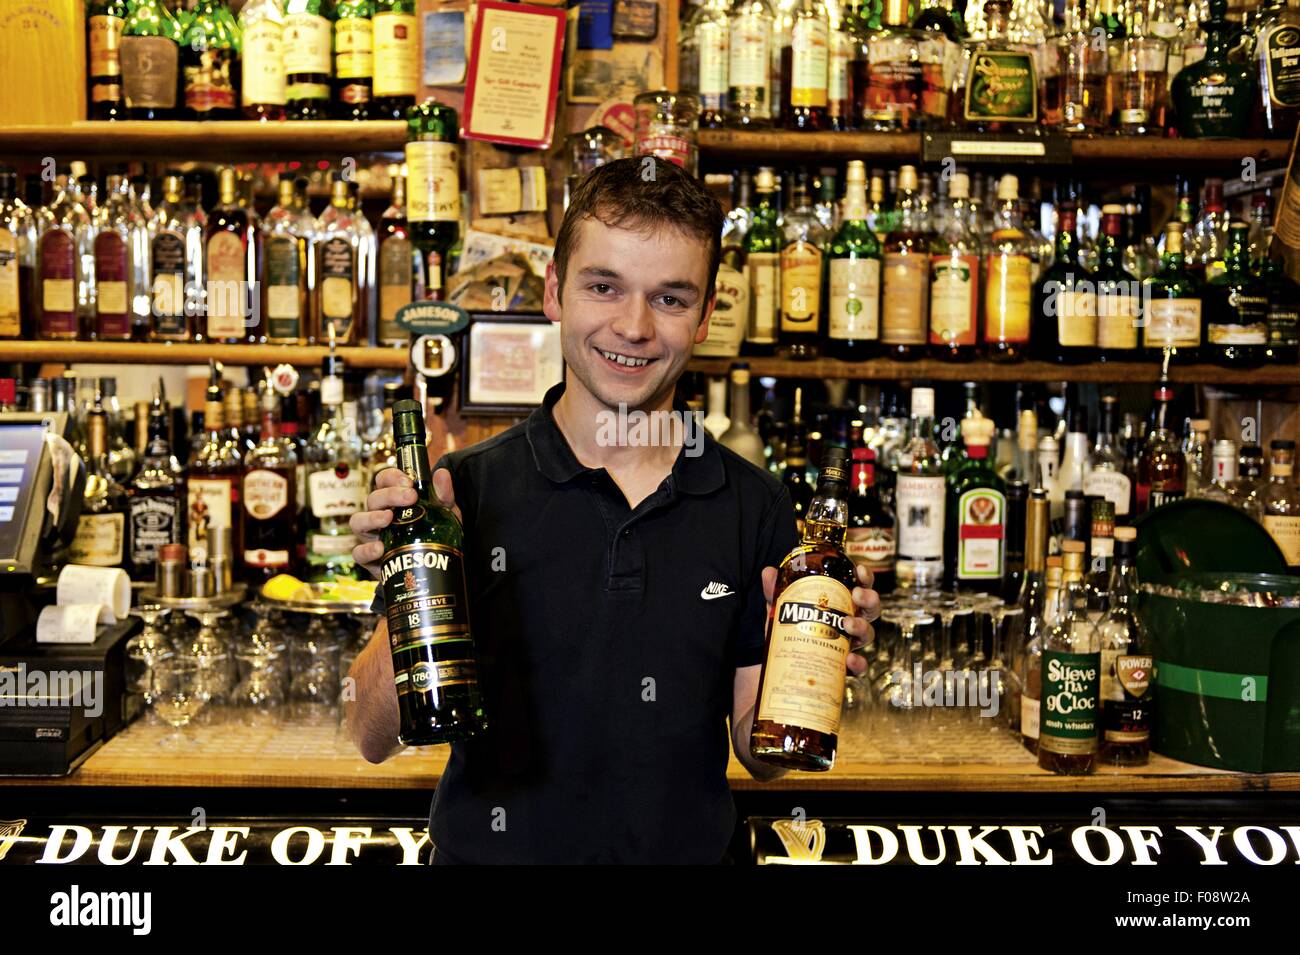 Bartender showing collection of wines in Pub Duke of York, Belfast, Ireland Stock Photo